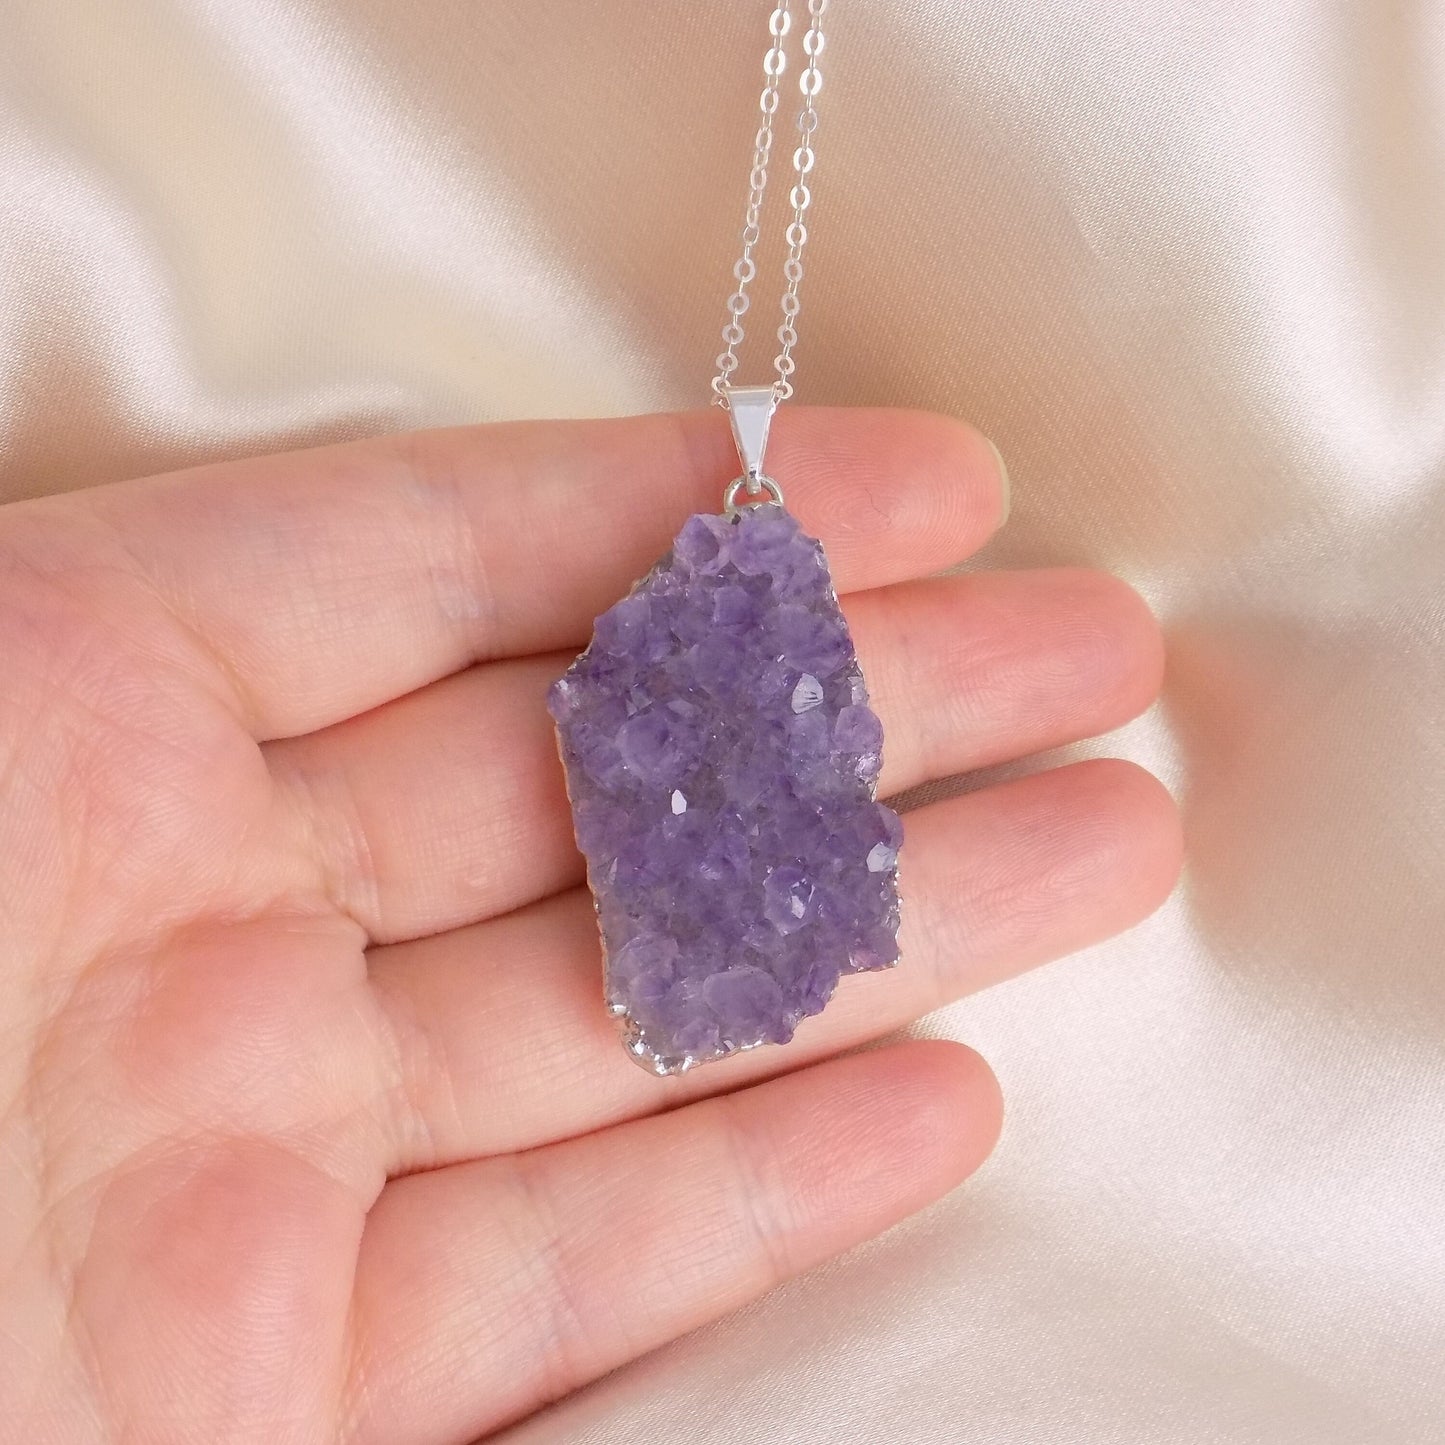 Christmas Gift For Her - Raw Amethyst Necklace Sterling Silver Chain - Purple Druzy Pendant - G15-226